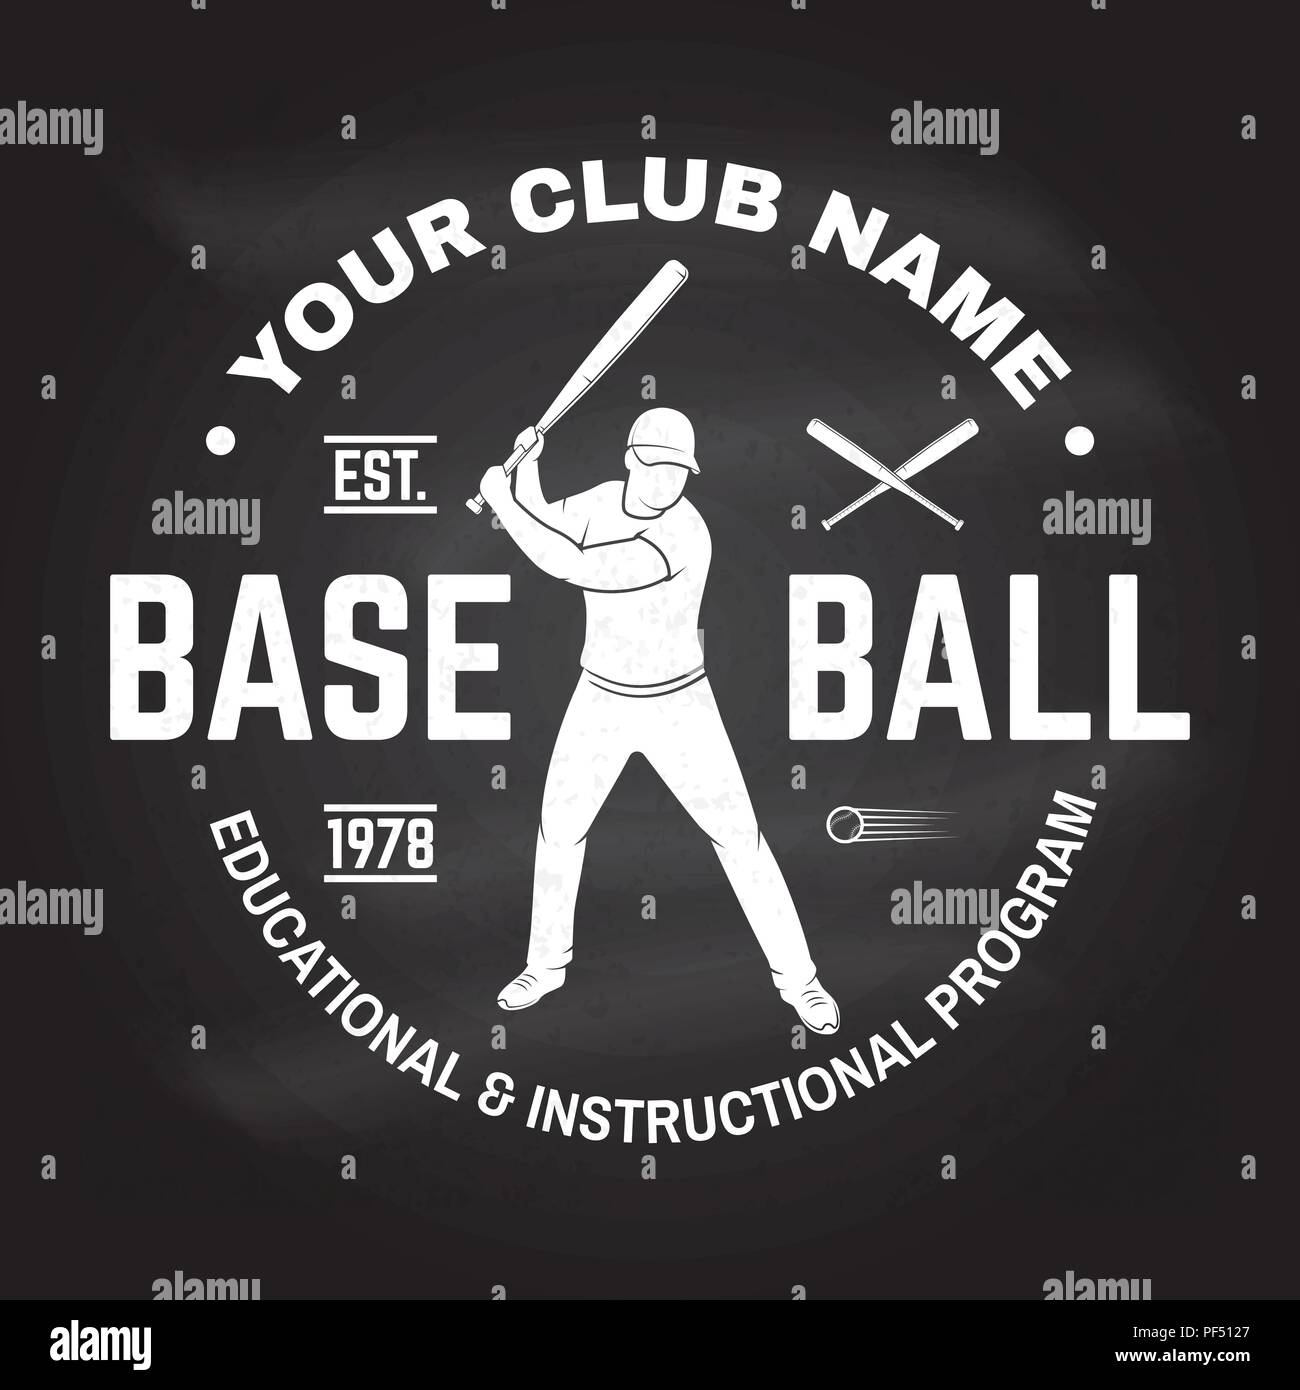 Baseball club badge on the chalkboard. Vector illustration. Concept for shirt or logo, print, stamp or tee. Vintage typography design with baseball batter and ball for baseball silhouette. Stock Vector